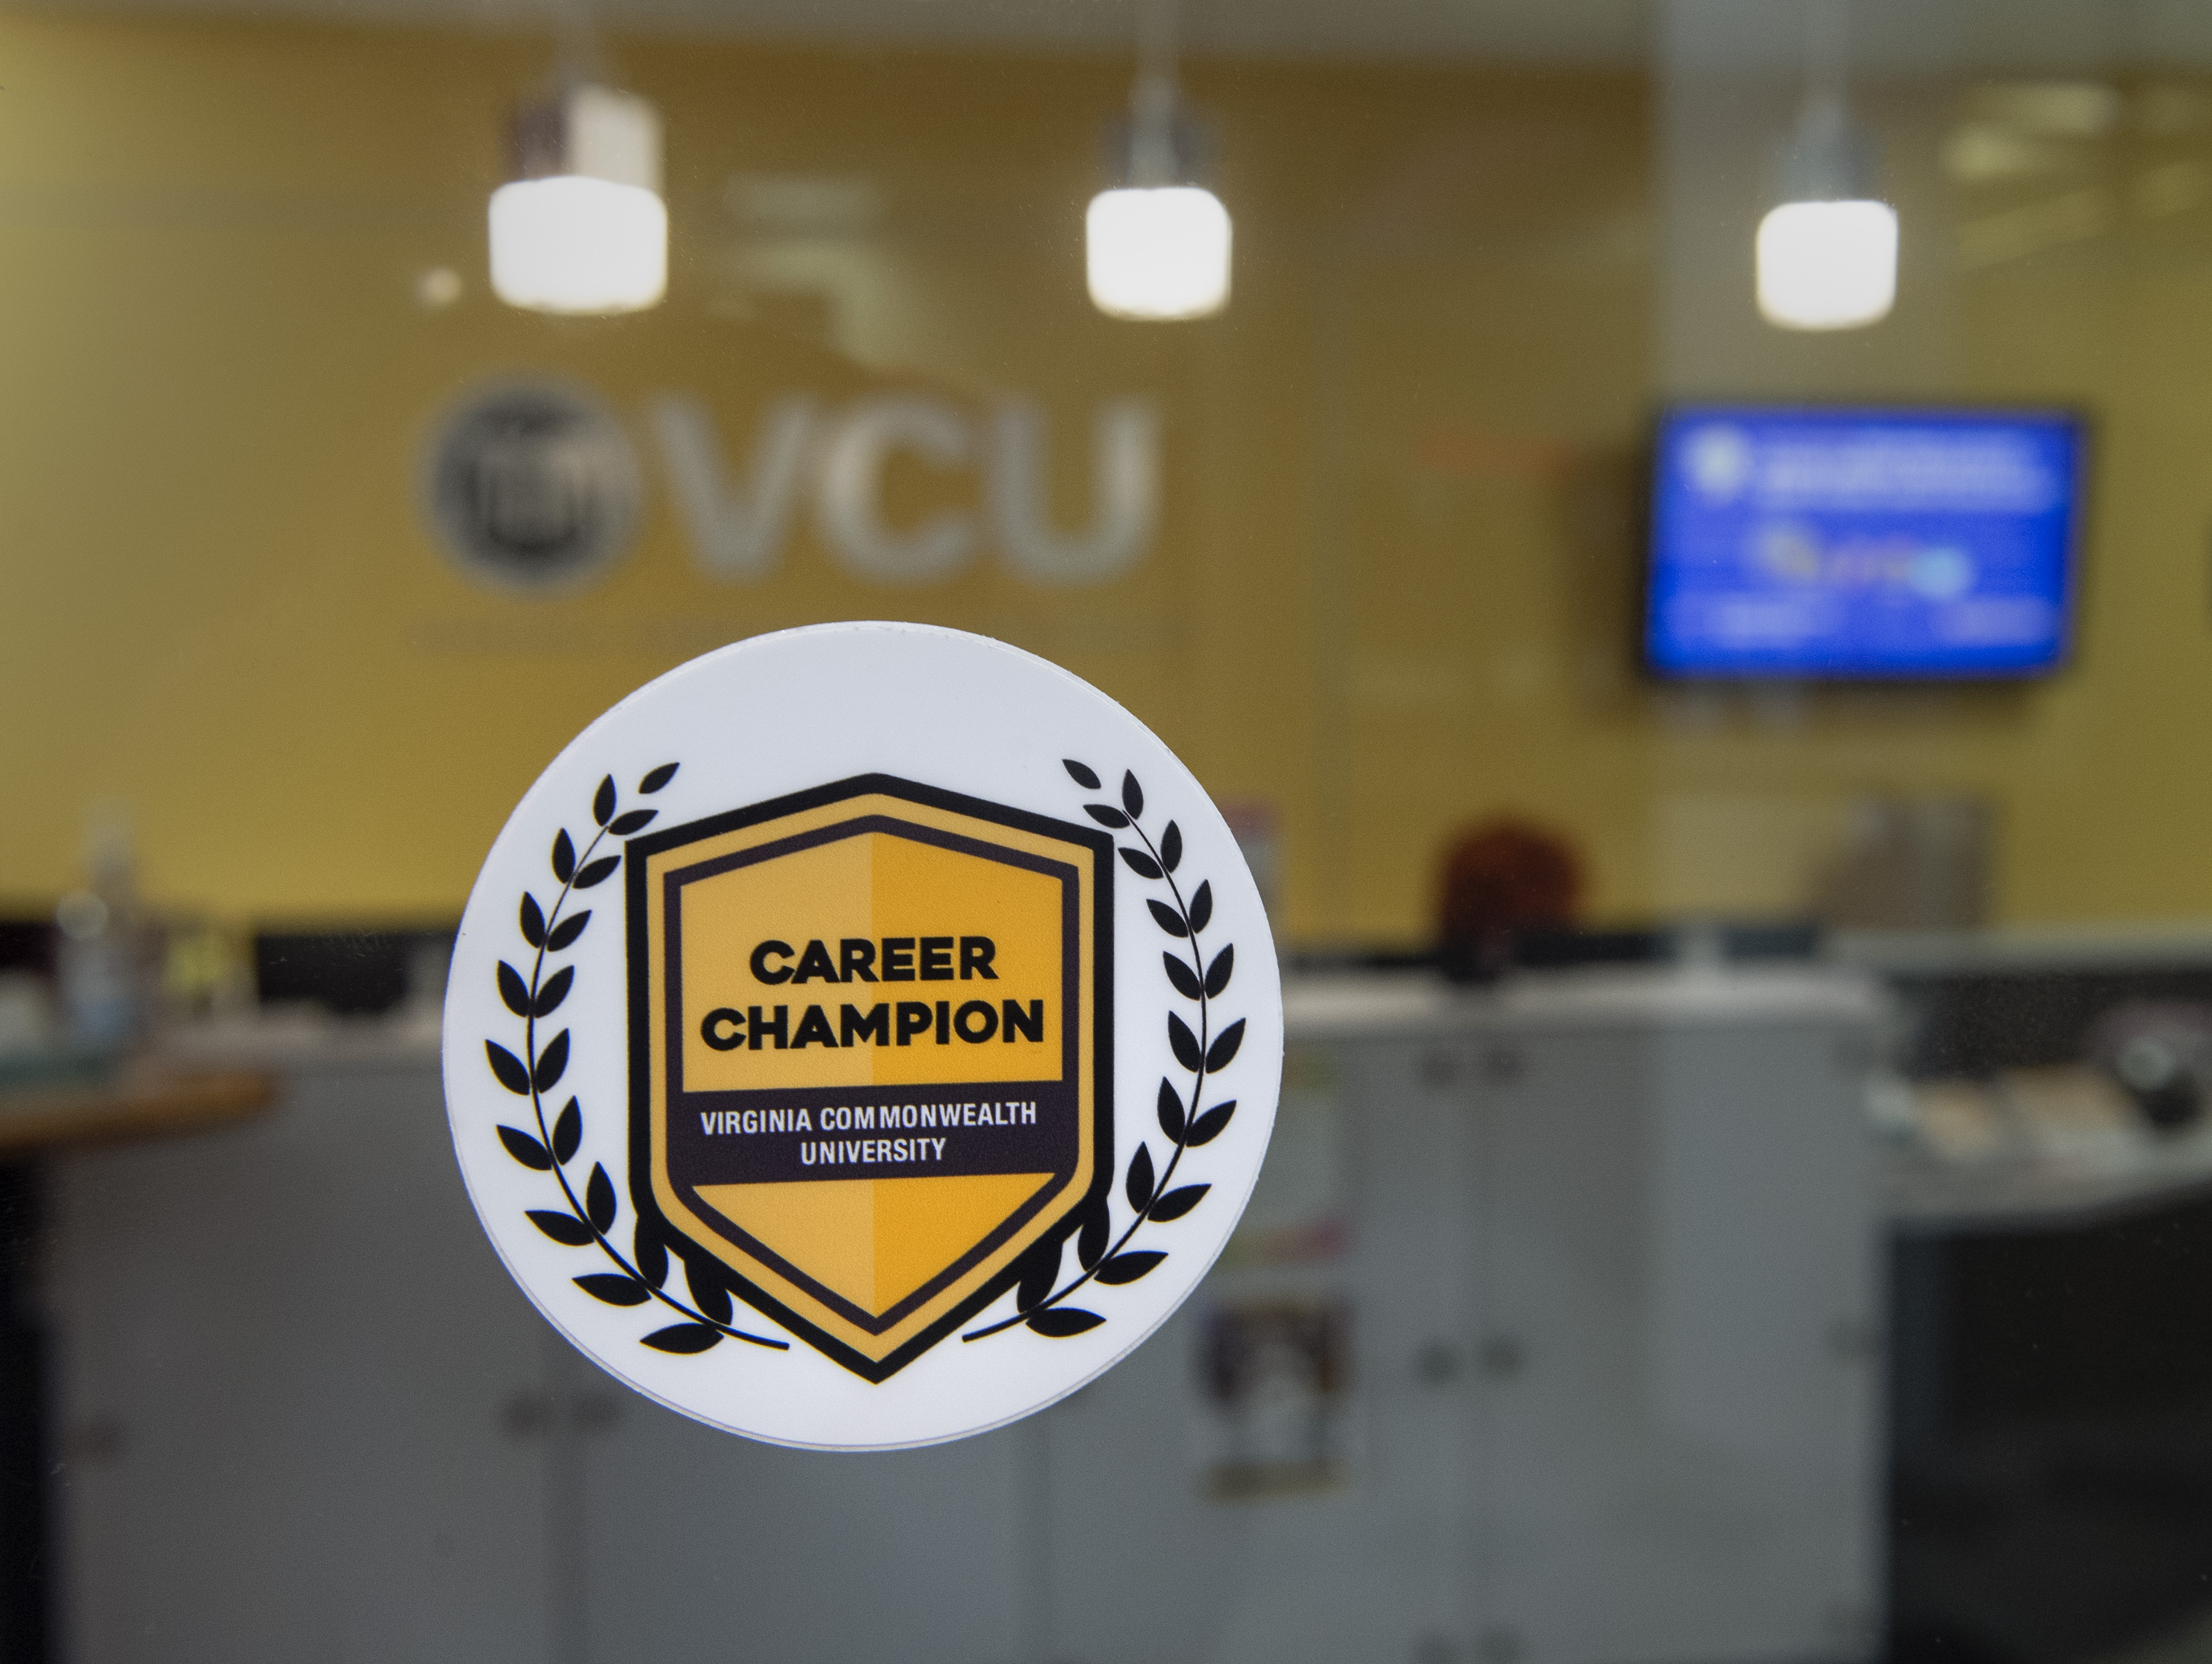 A white sticker with a yellow crest is in the foreground of an office with VCU on the back wall. The sticker reads "Career Champion, Virginia Commonwealth University"